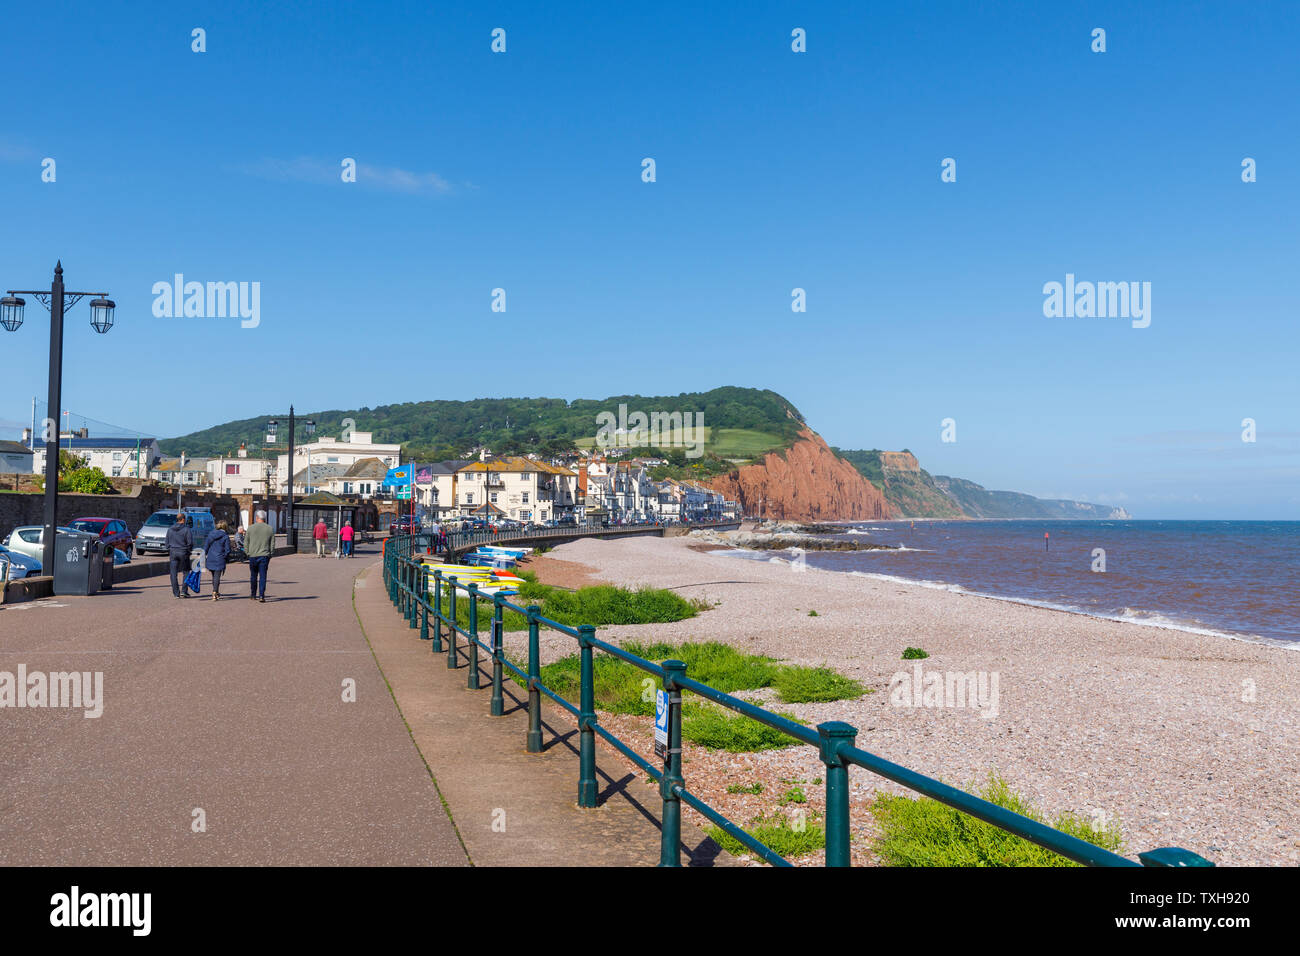 Seafront promenade and shingle beach looking east at Sidmouth, a small popular south coast seaside town in Devon, south-west England Stock Photo